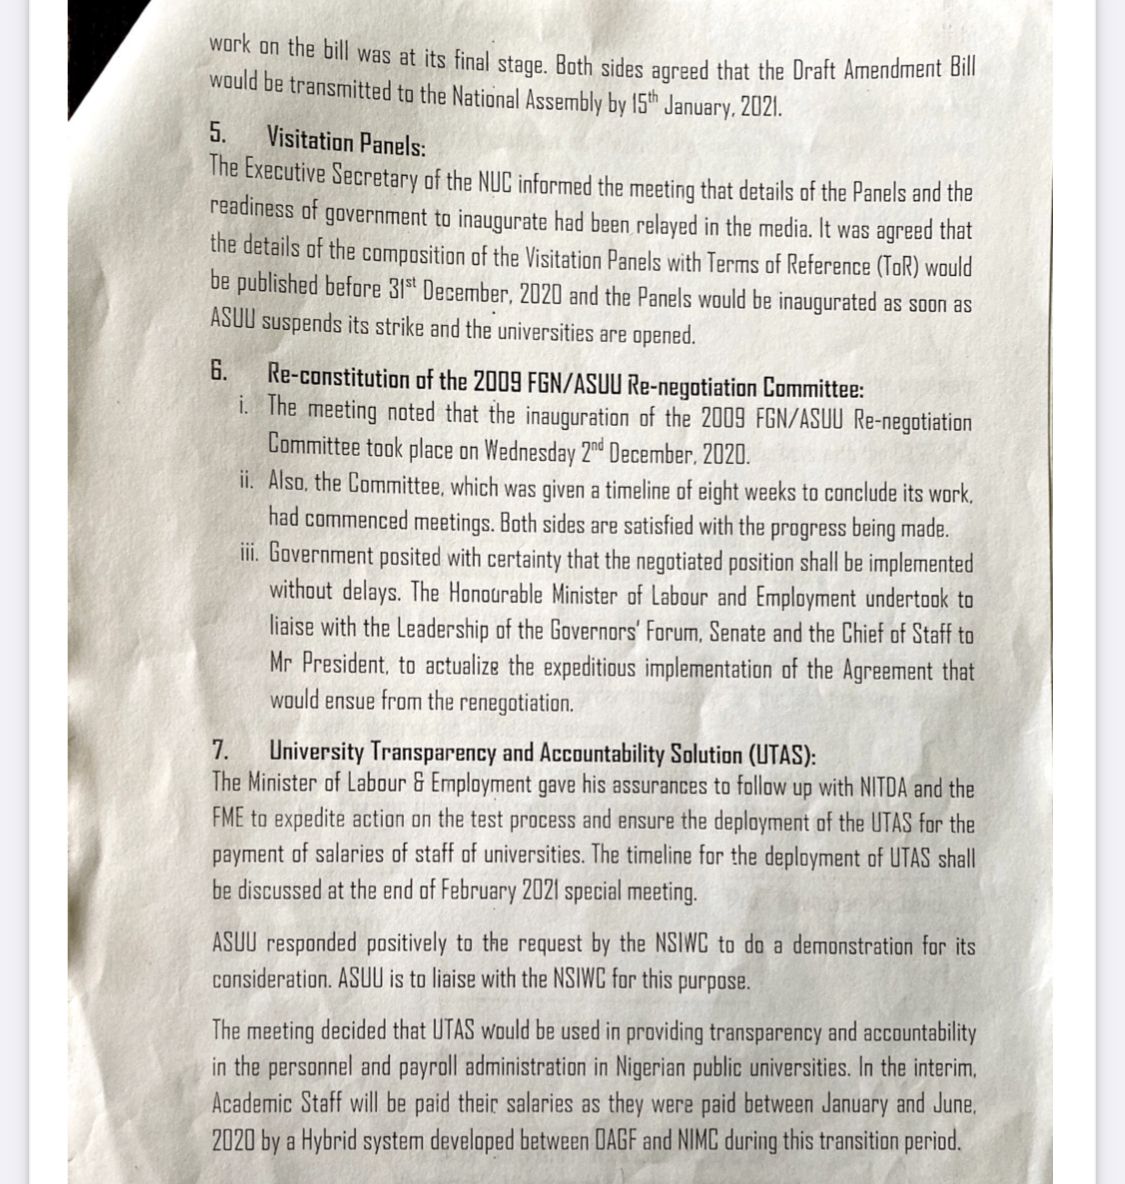 Dataphyte: The 2020 Memorandum of Action at the Heart of ASUU, Federal Government Impasse